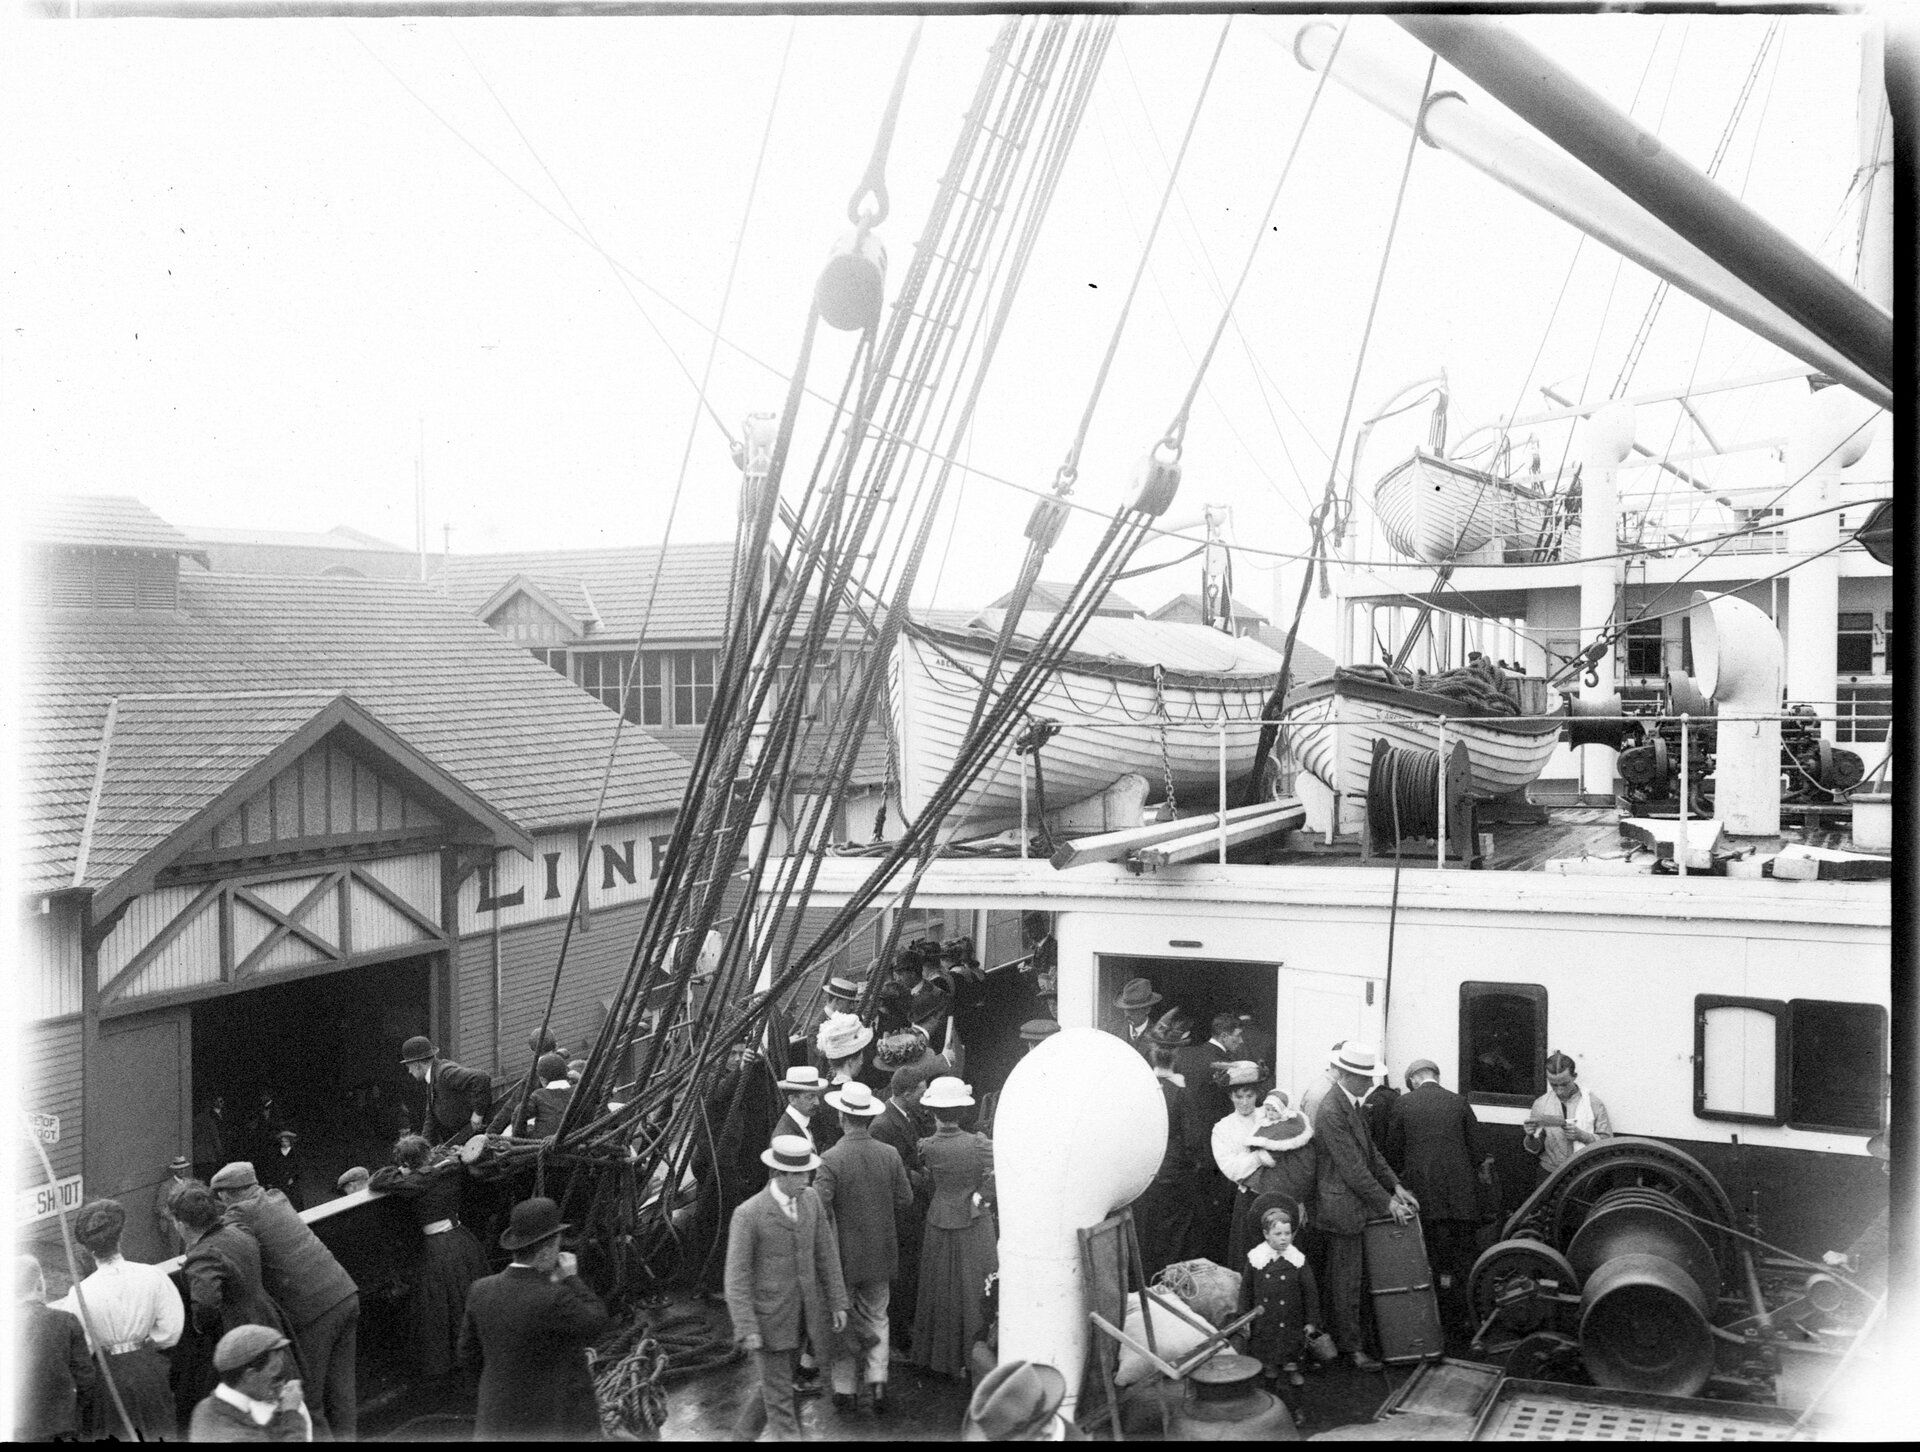 People crowd on board the deck of a ship